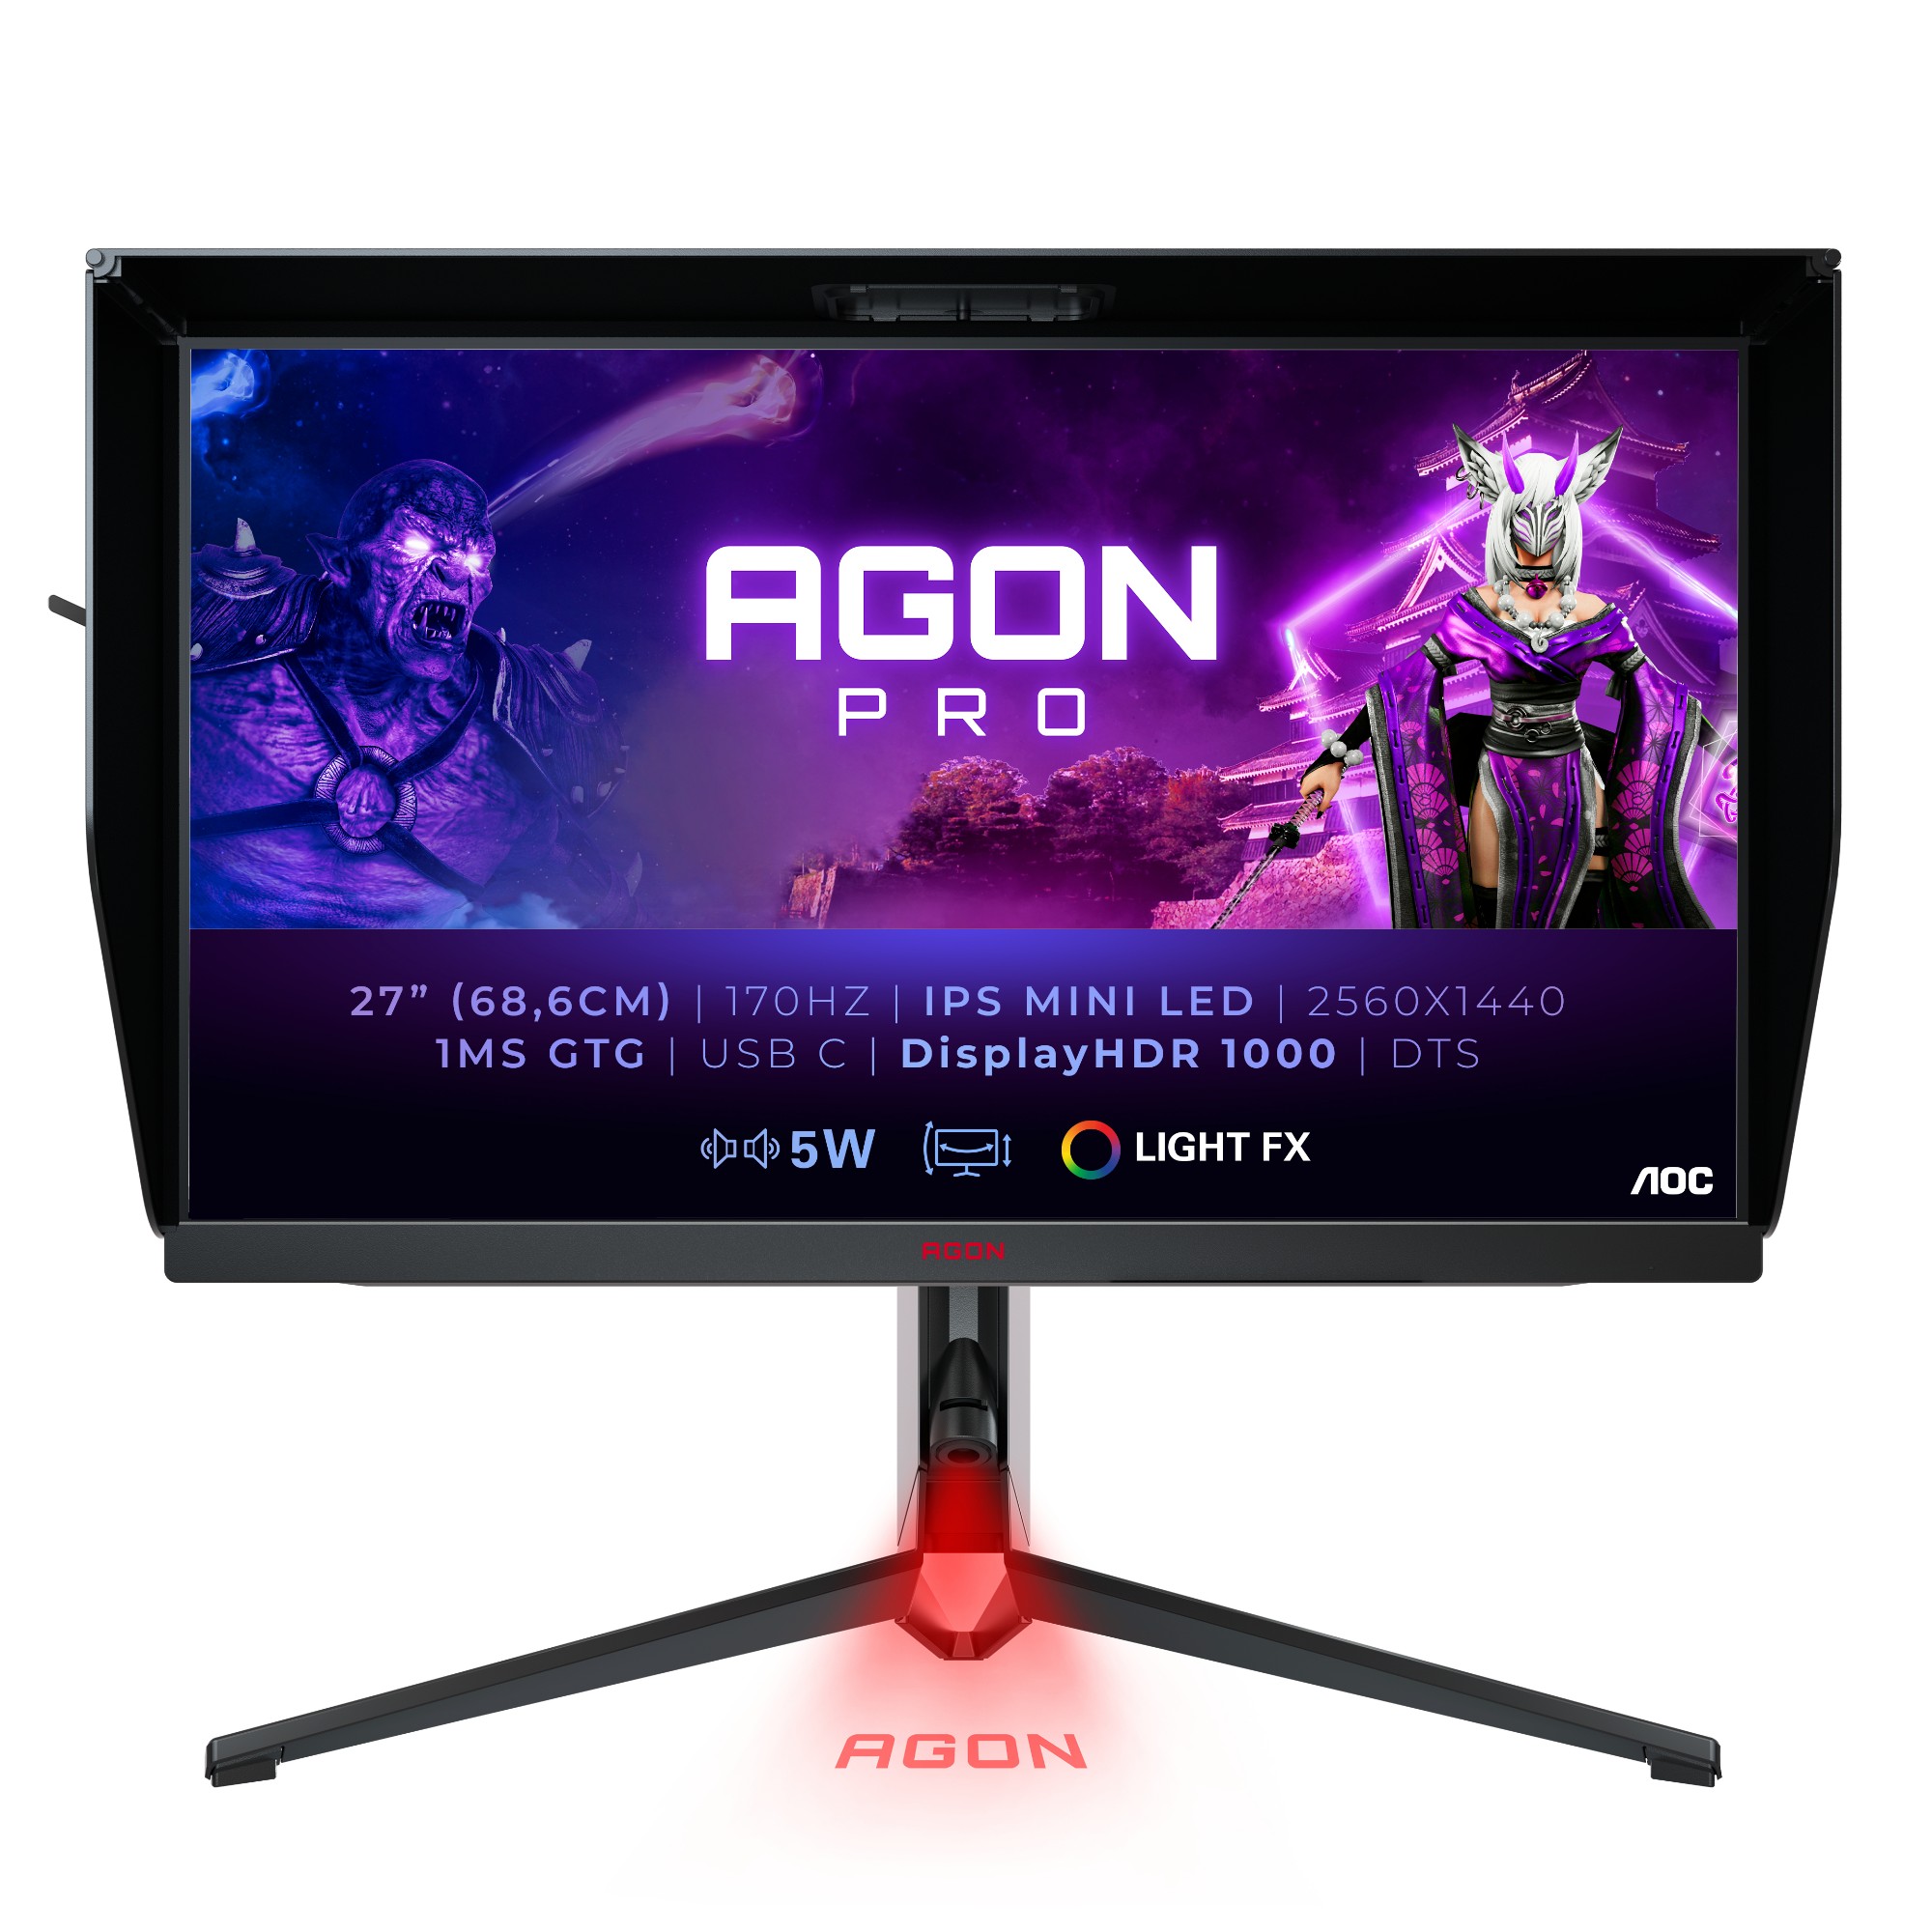 Screen size (inch) 27, Panel resolution 2560x1440, Refresh rate 170 Hz, Panel type IPS, USB-C connectivity USB-C 3.2 x 1 (DP alt mode, upstream, power delivery up to 65 W), HDMI HDMI 2.0 x 2, Display Port DisplayPort 1.4 x 1, Sync technology (VRR) Adaptiv